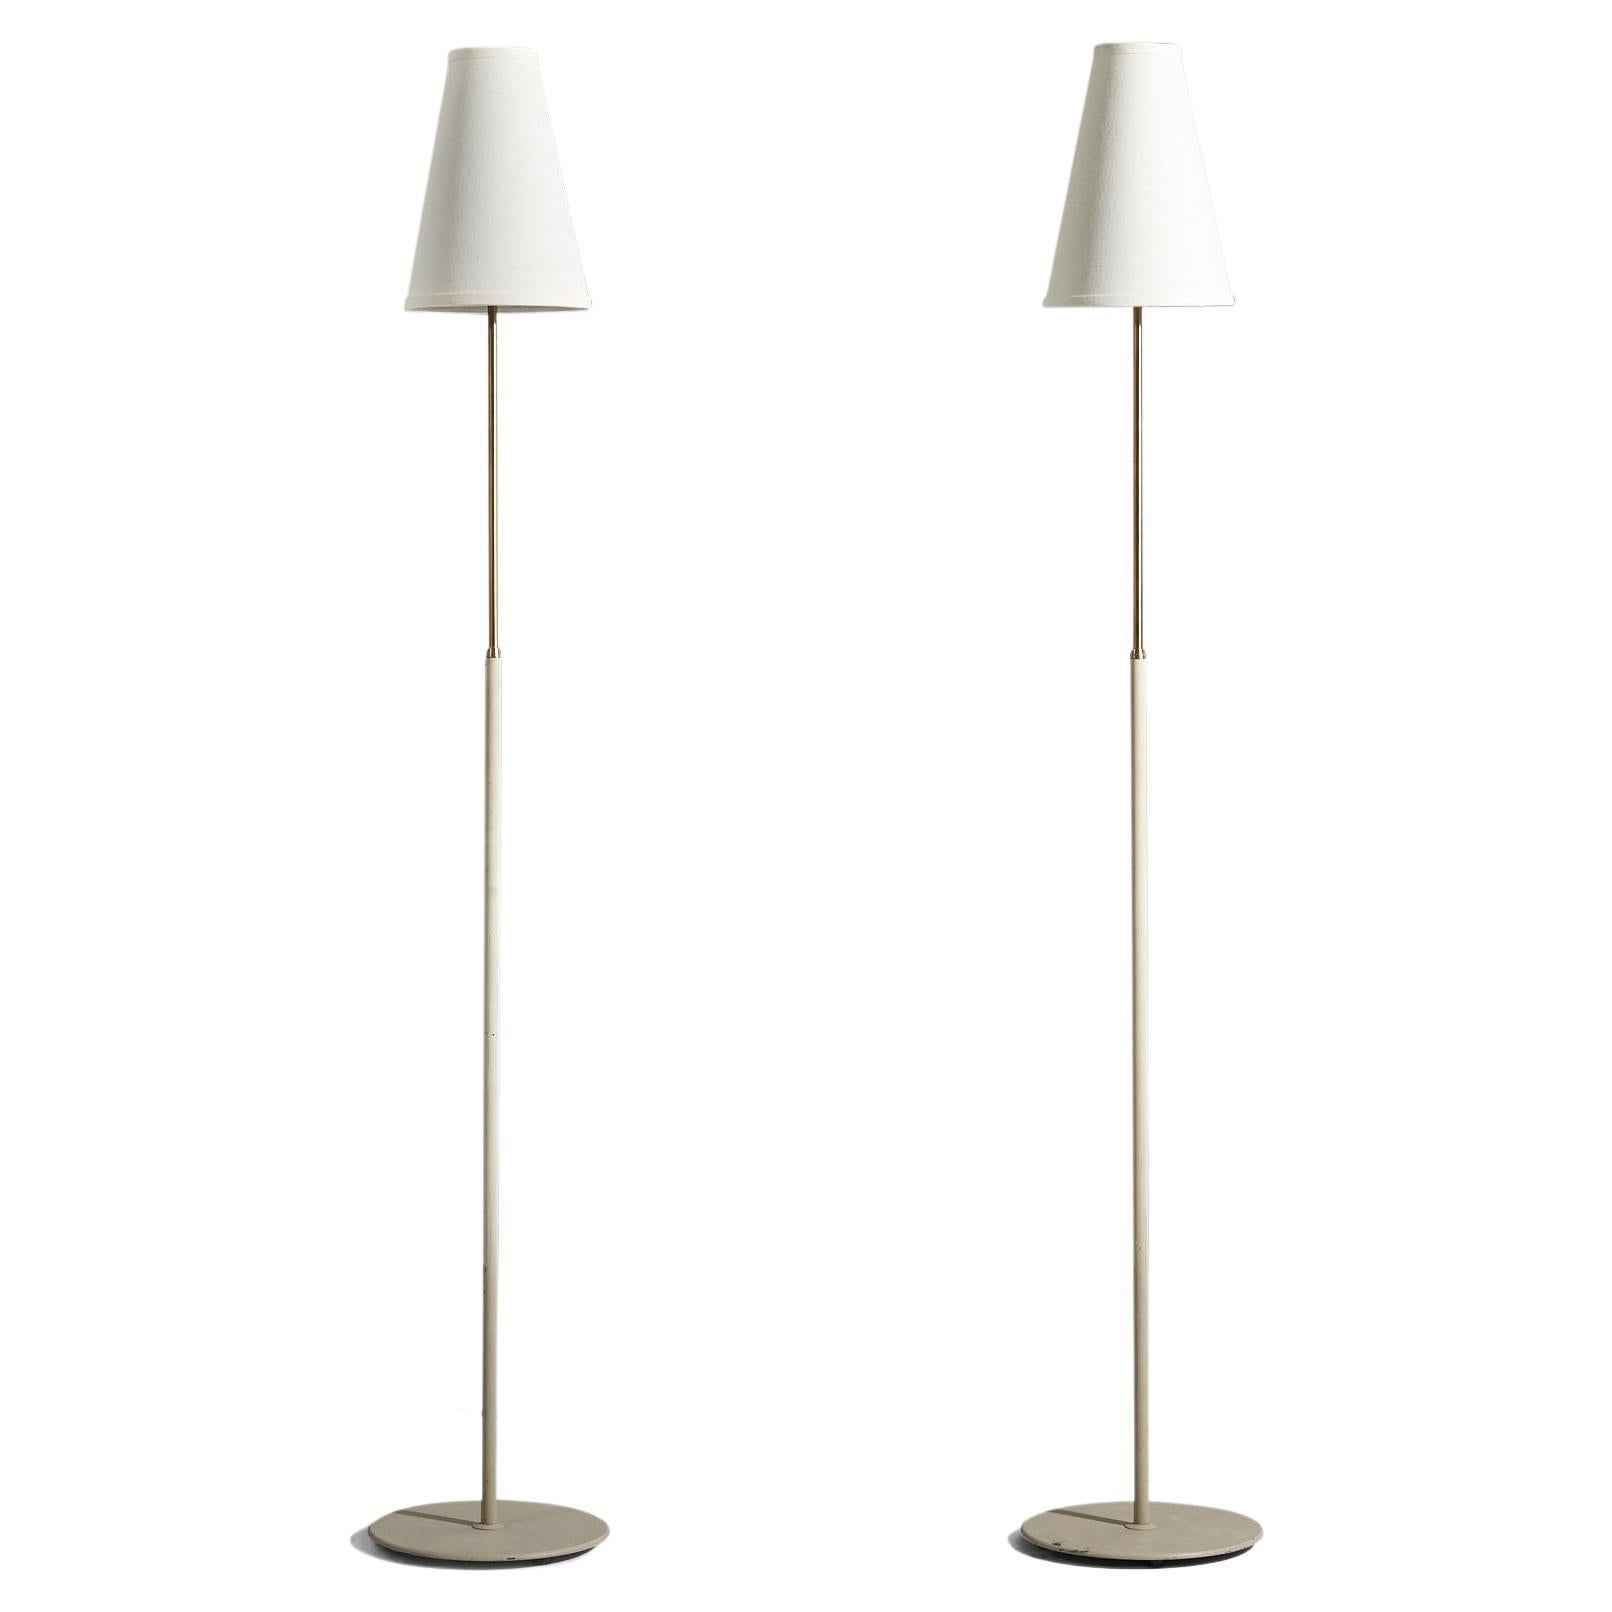 ASEA, Floor Lamps, Brass, Brass, Lacquered Metal, Sweden, 1970s For Sale